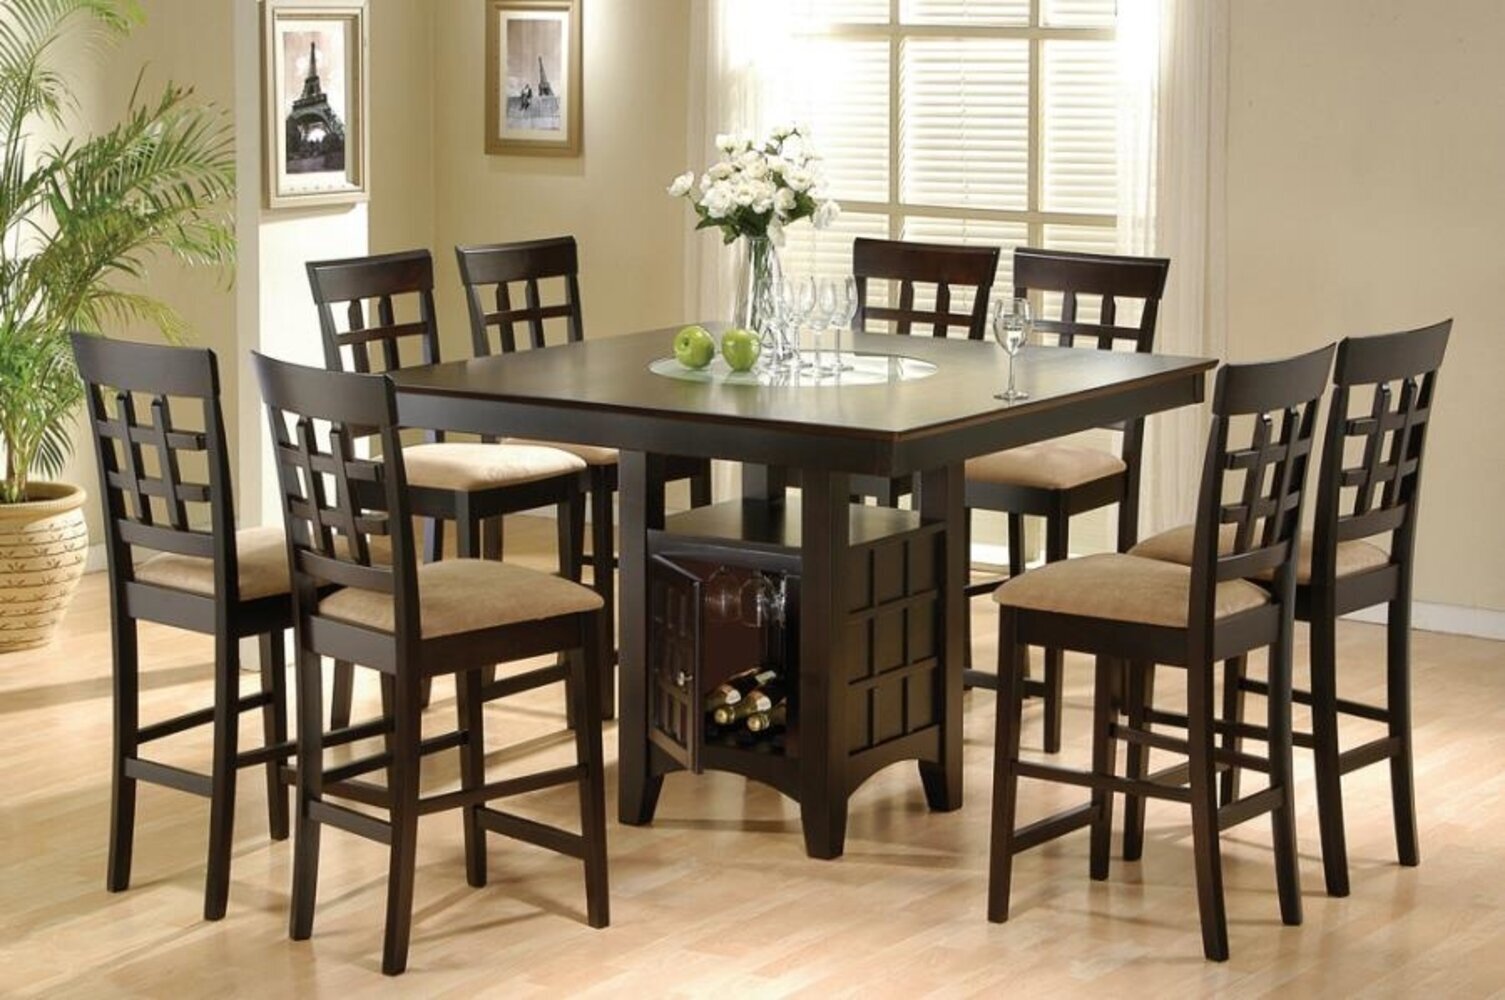 Counter height dining set with wine rack